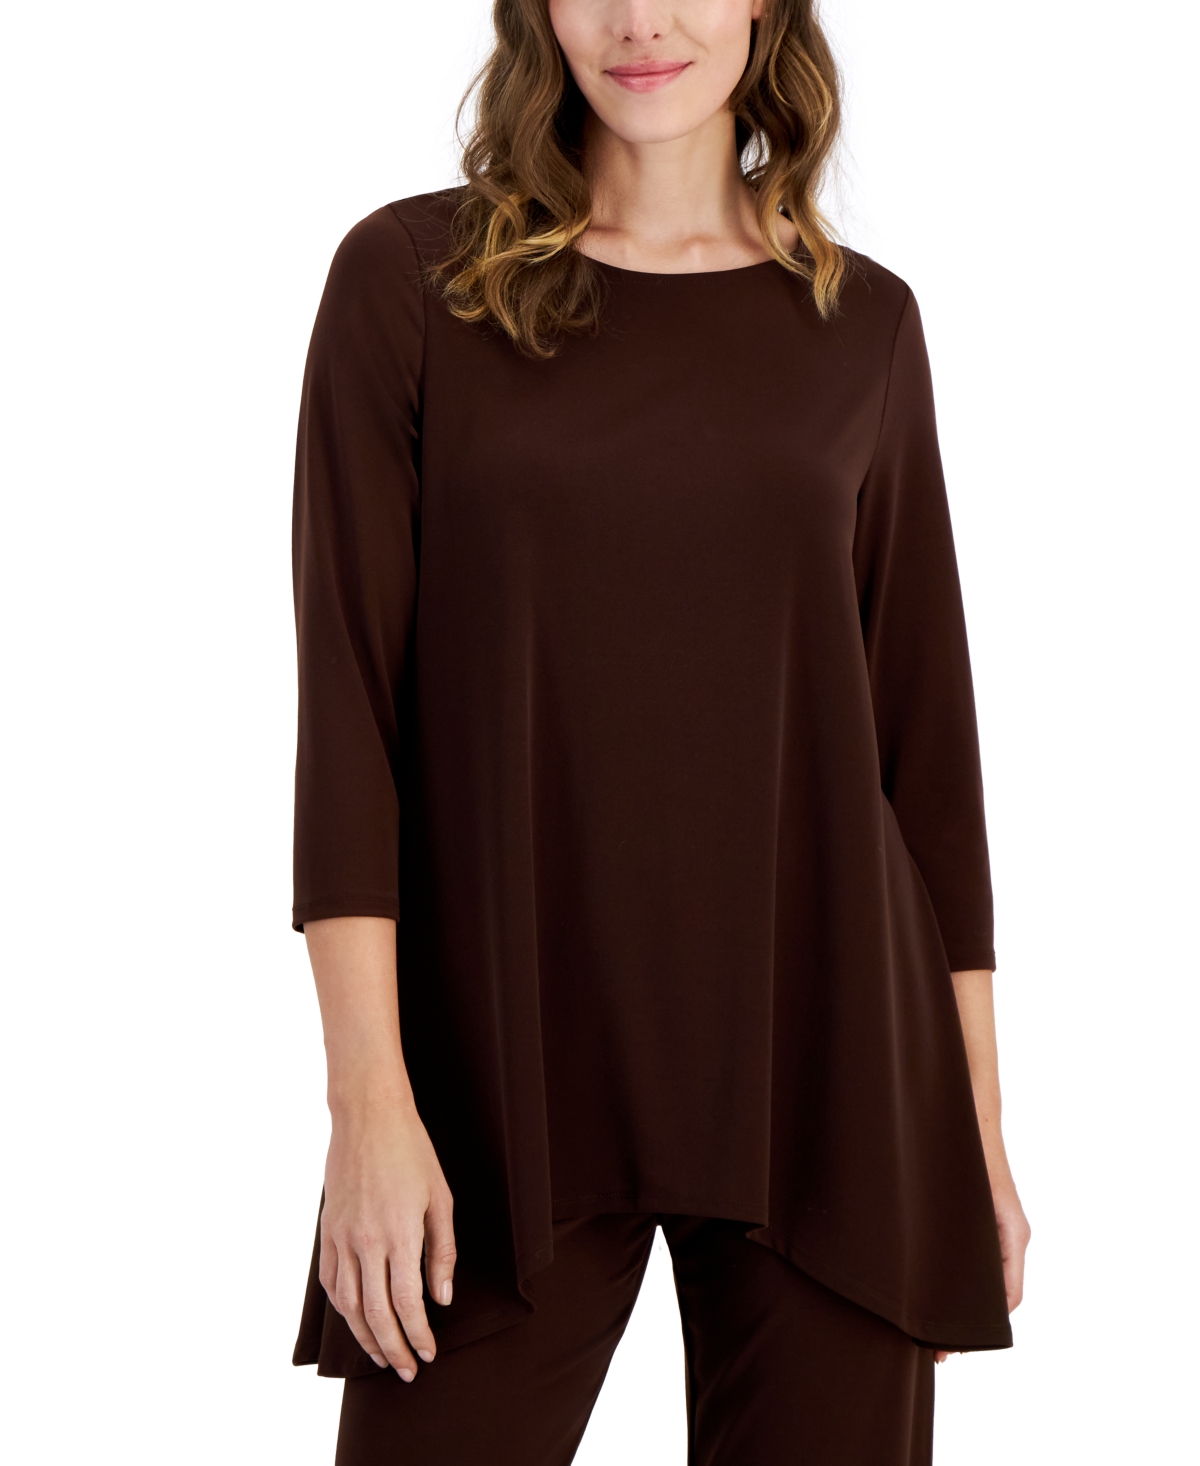 Women's 3/4-Sleeve Knit Top, Regular & Petite, Created for Macy's - Firewood